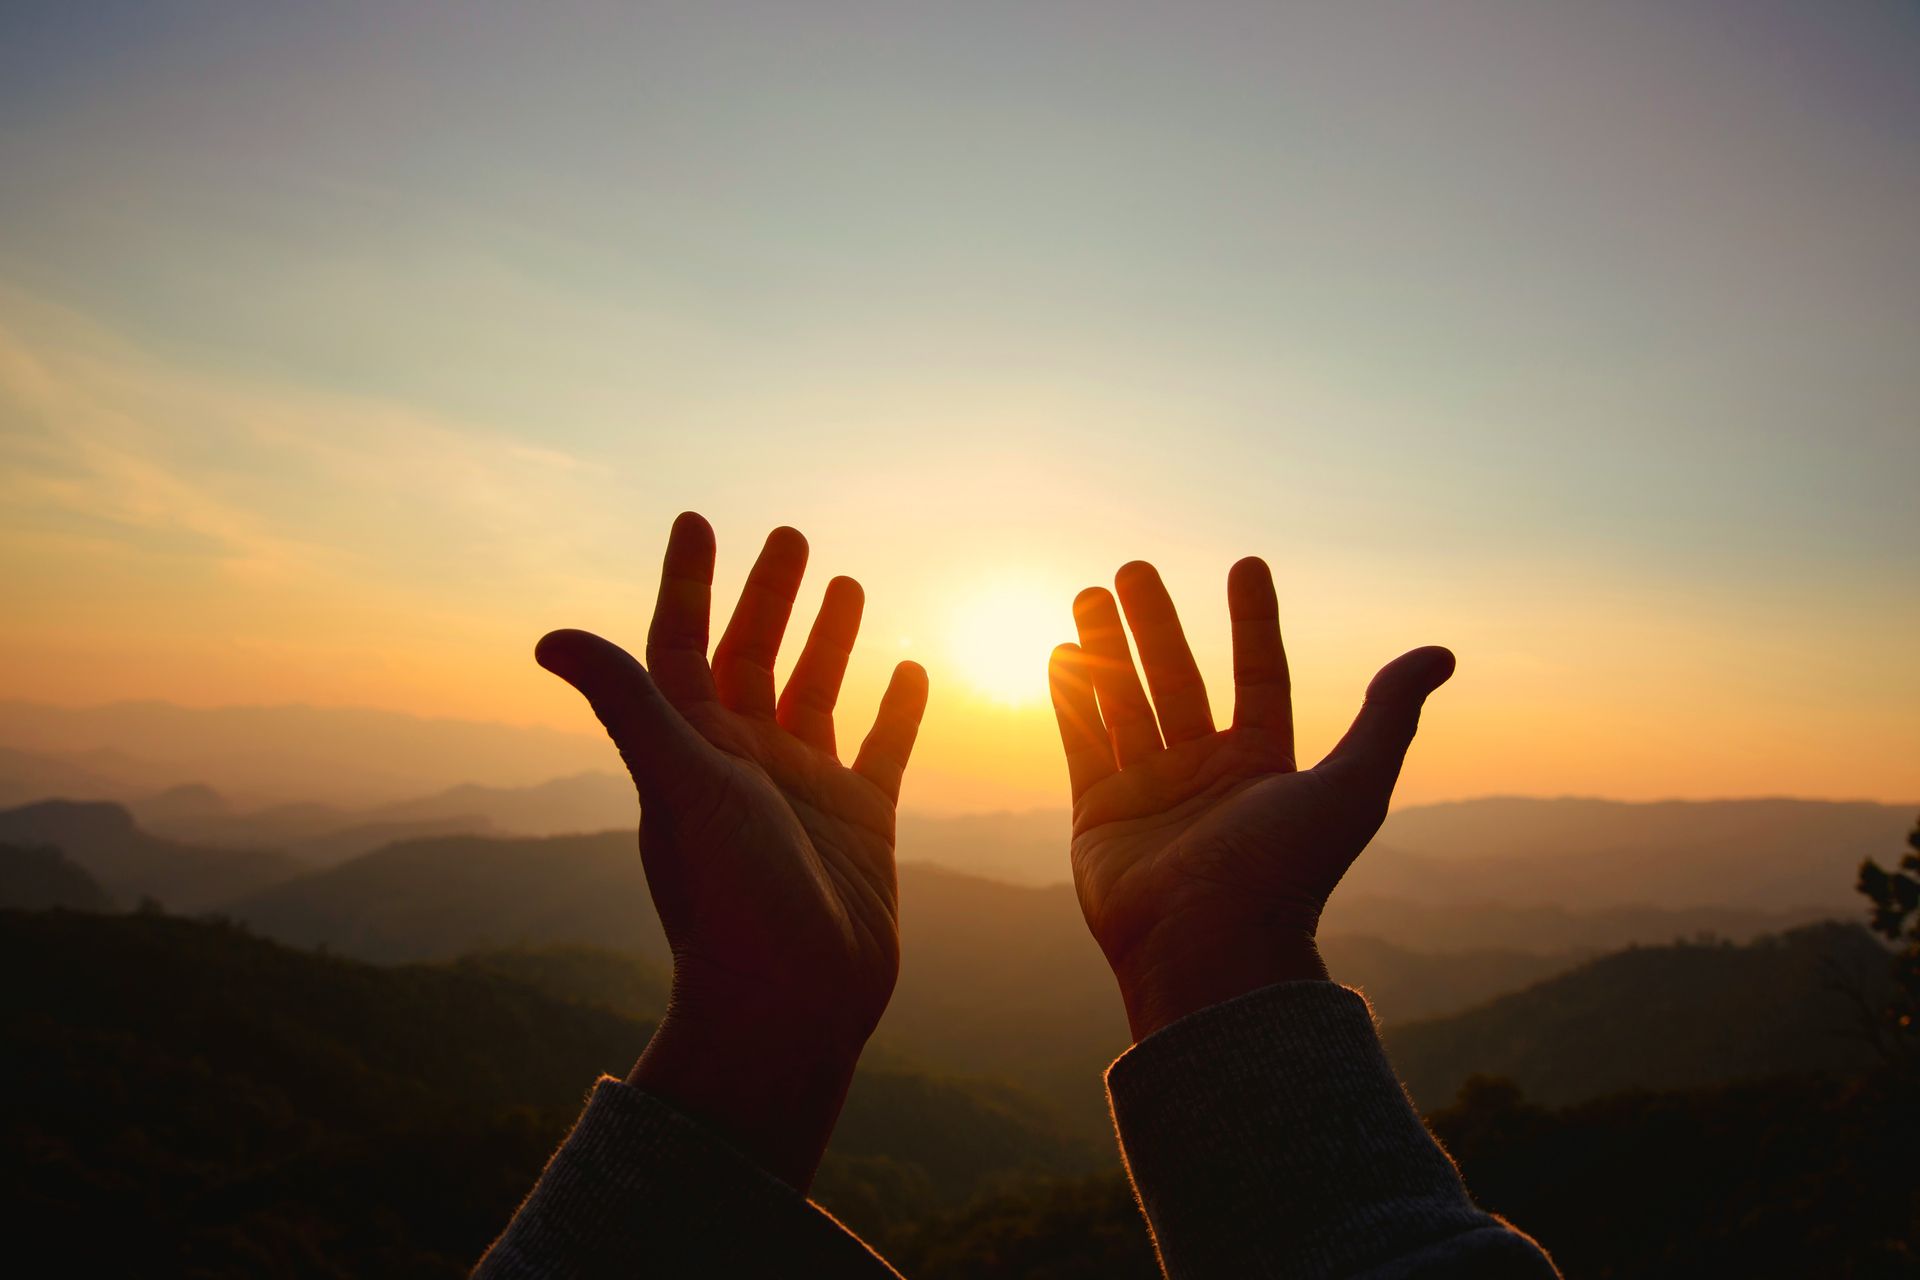 a person is holding their hands up towards the sun at sunset